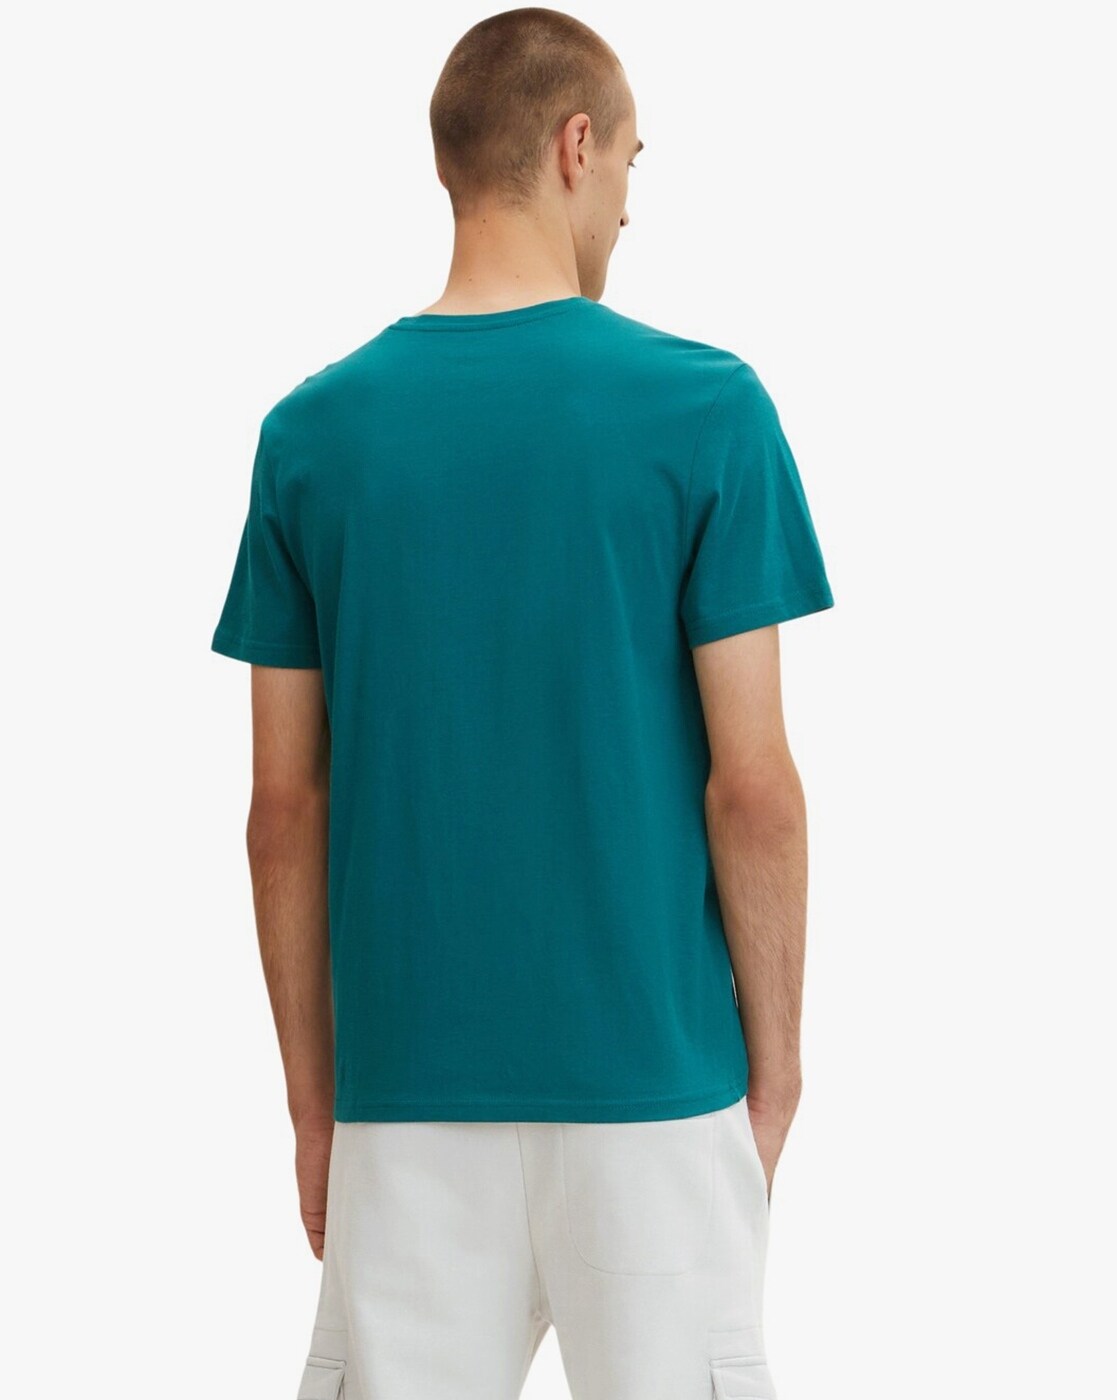 Buy Green Tailor by Tom Tshirts Men Online for